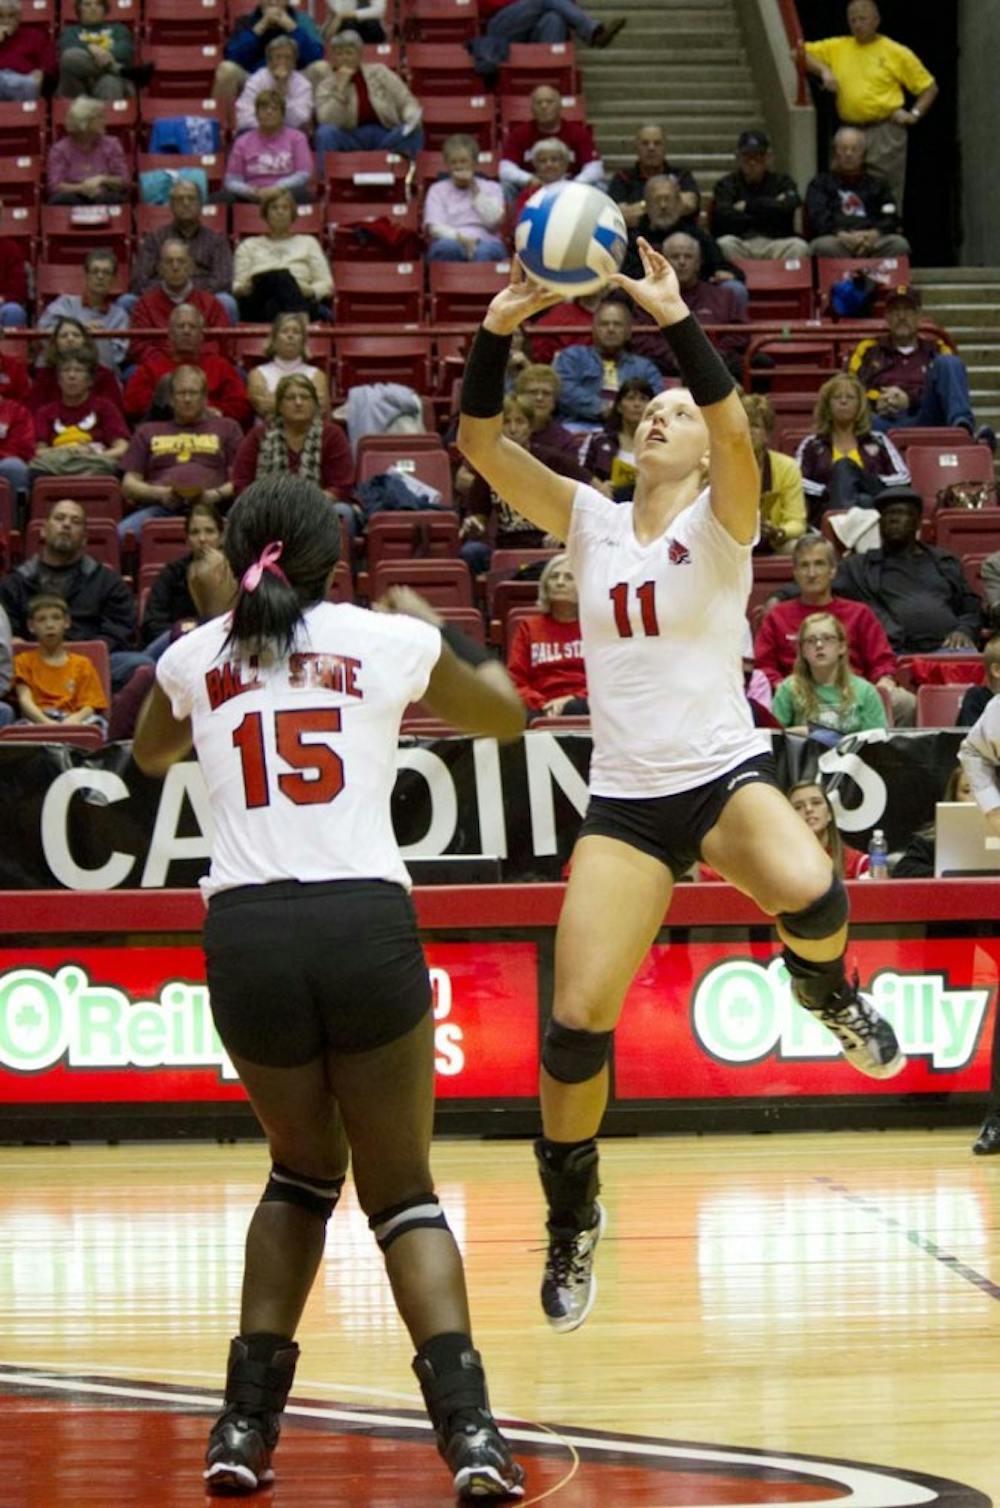 Junior Jacqui Seidel sets the ball for senior Lisa Scott during the game against Central Michigan on Oct. 5. The Cardinals will take on Western Michigan on Friday and Northern Illinois on Sunday. DN FILE PHOTO EMMA FLYNN